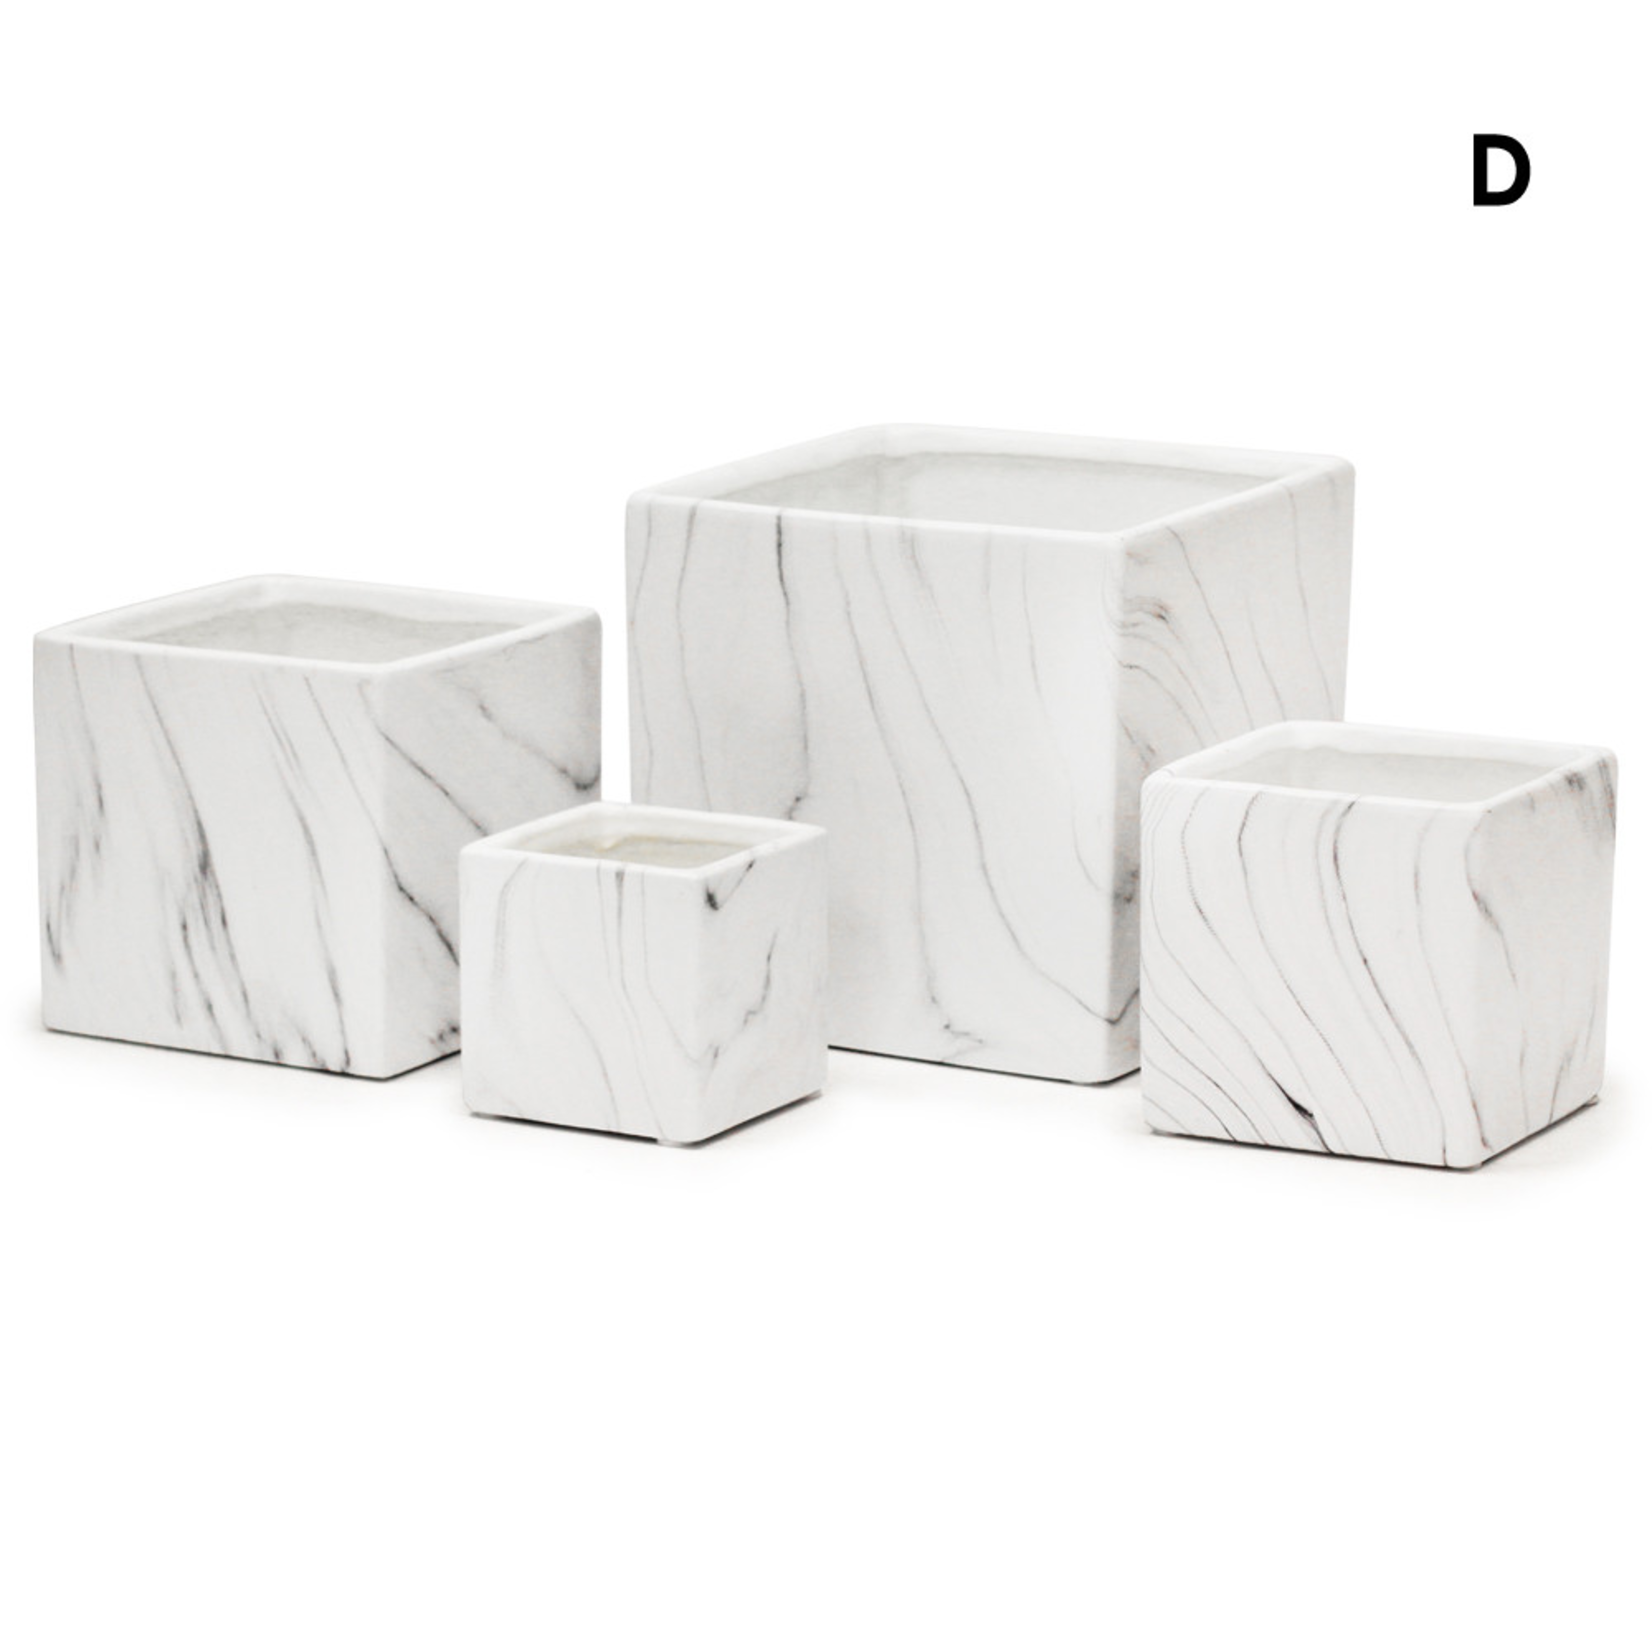 50% off was $18 now $9.00, 6.5" X 6.5" X 6.5" WHITE CERAMIC MARBLE CUBE SQUARE POT VASE